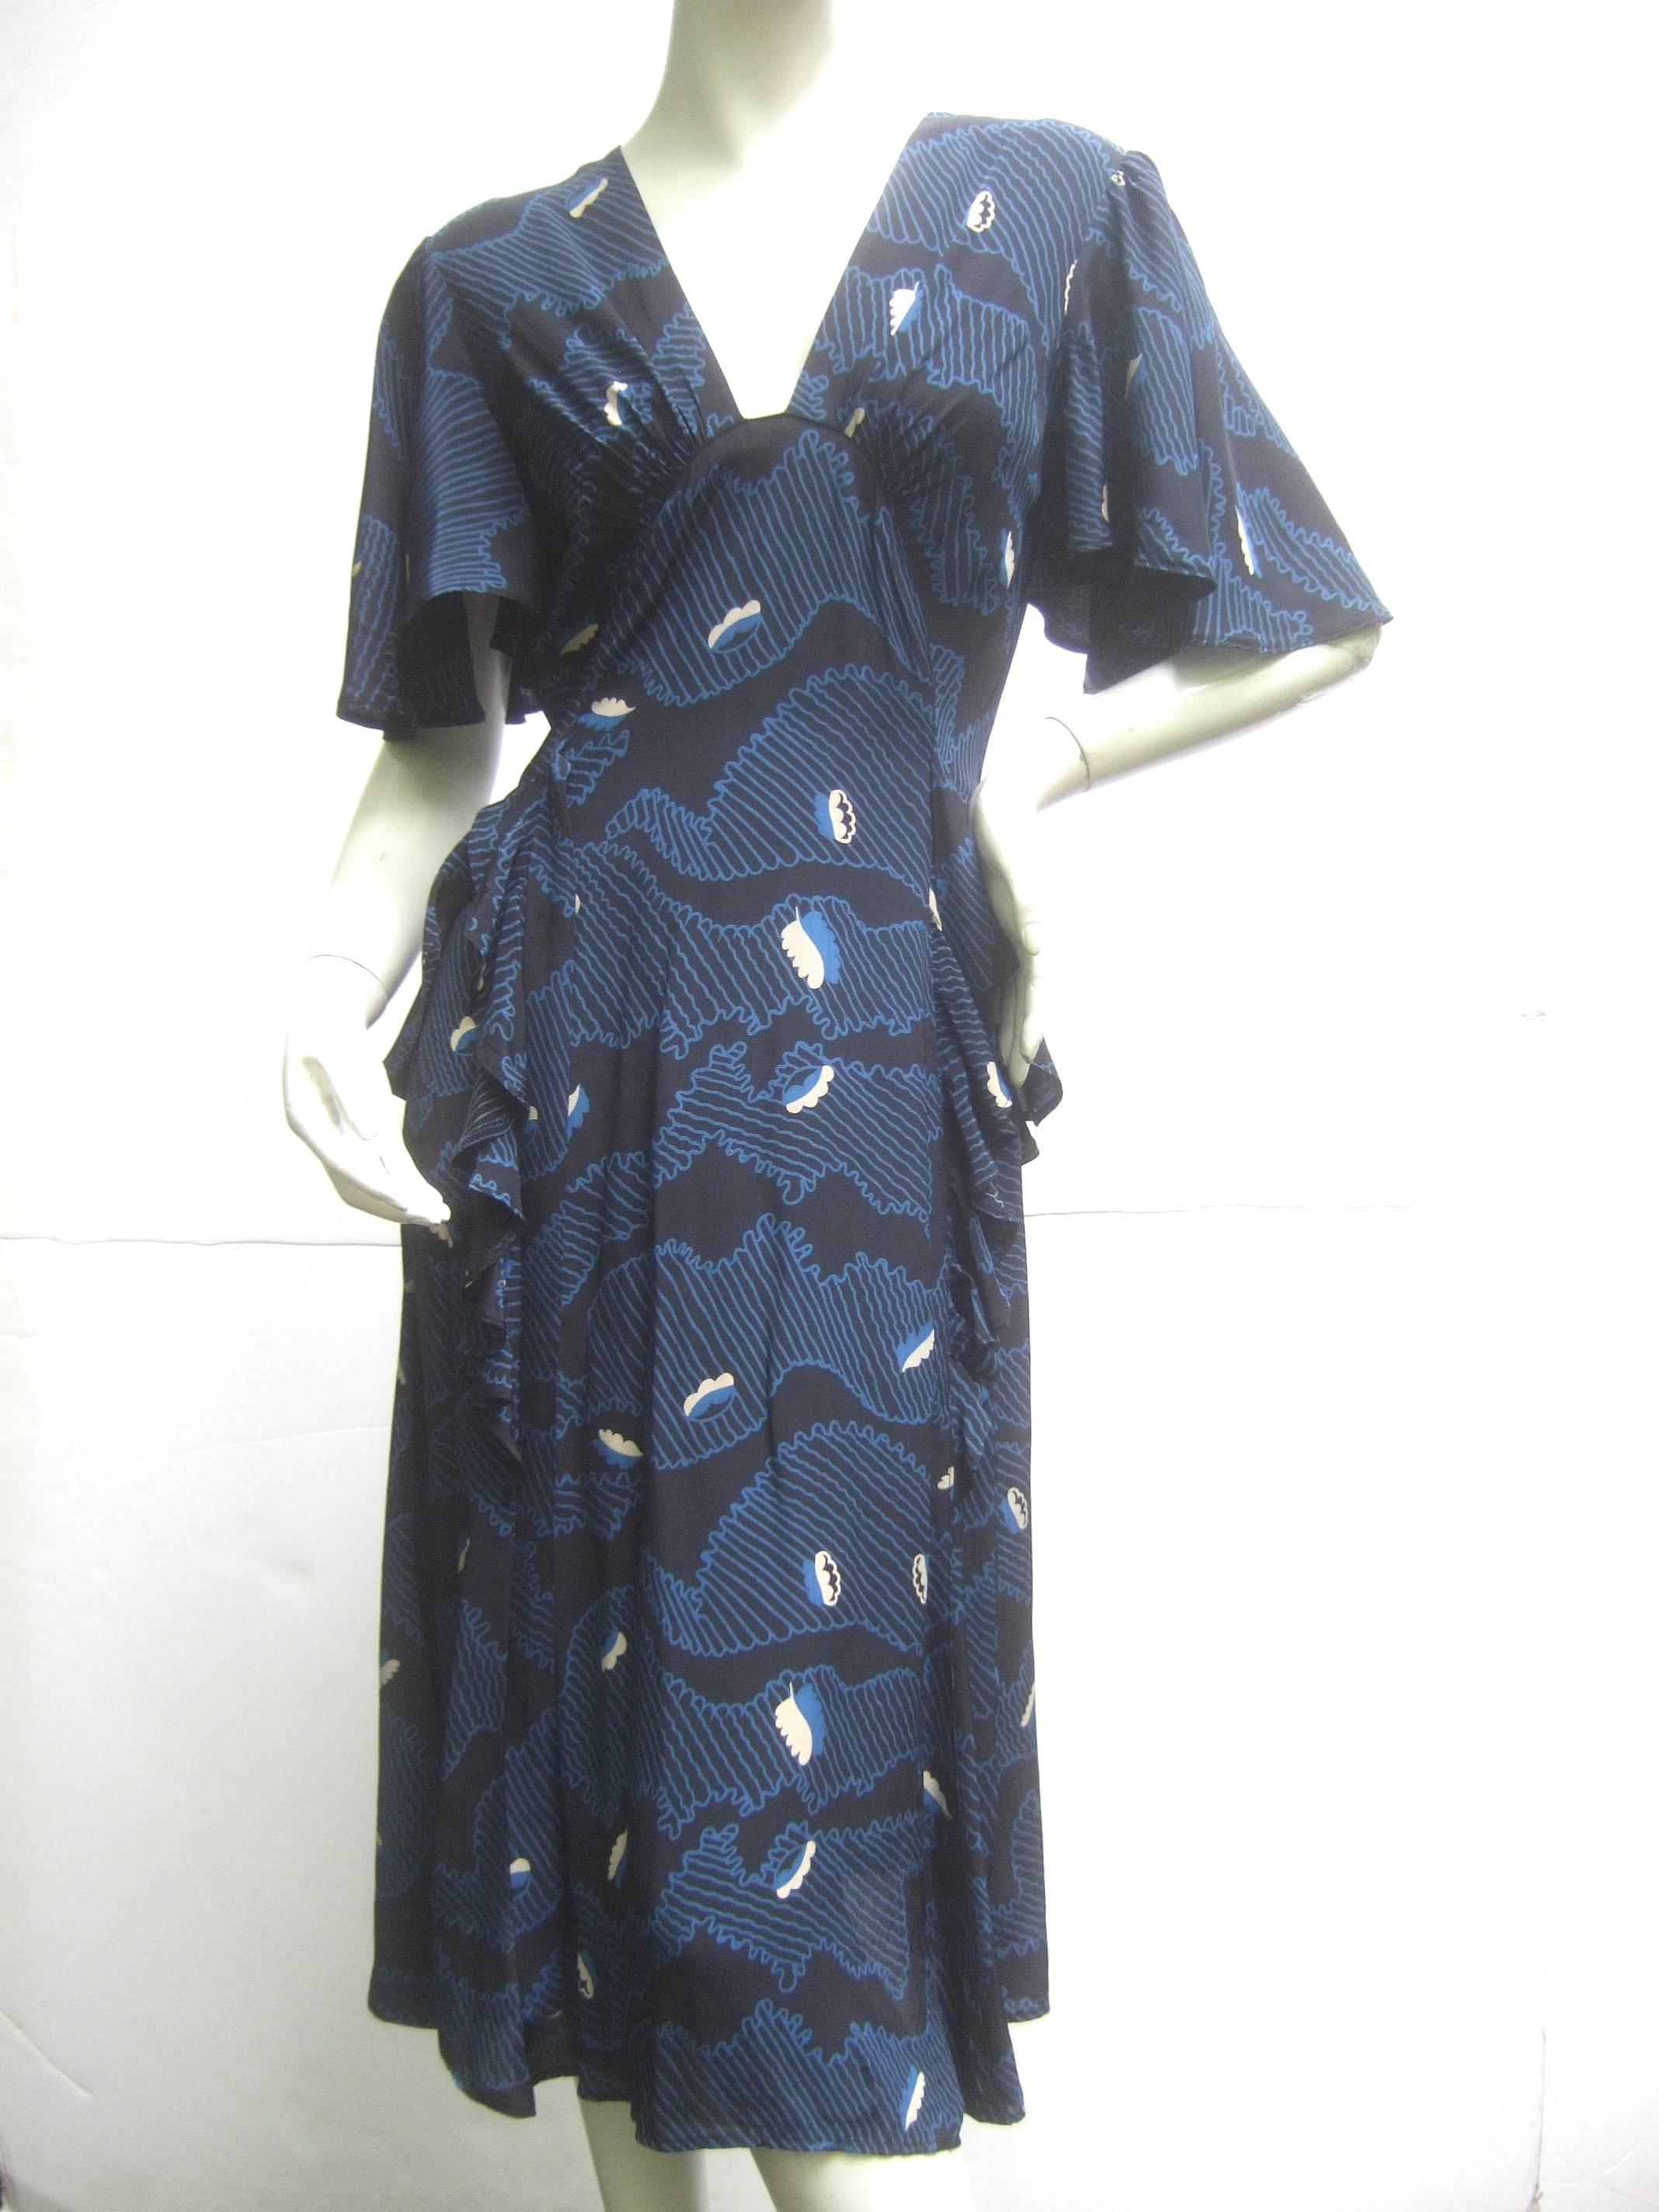 Ossie Clark Moss Crepe Dress with Celia Birtwell Fabric. Early 1970's. 5